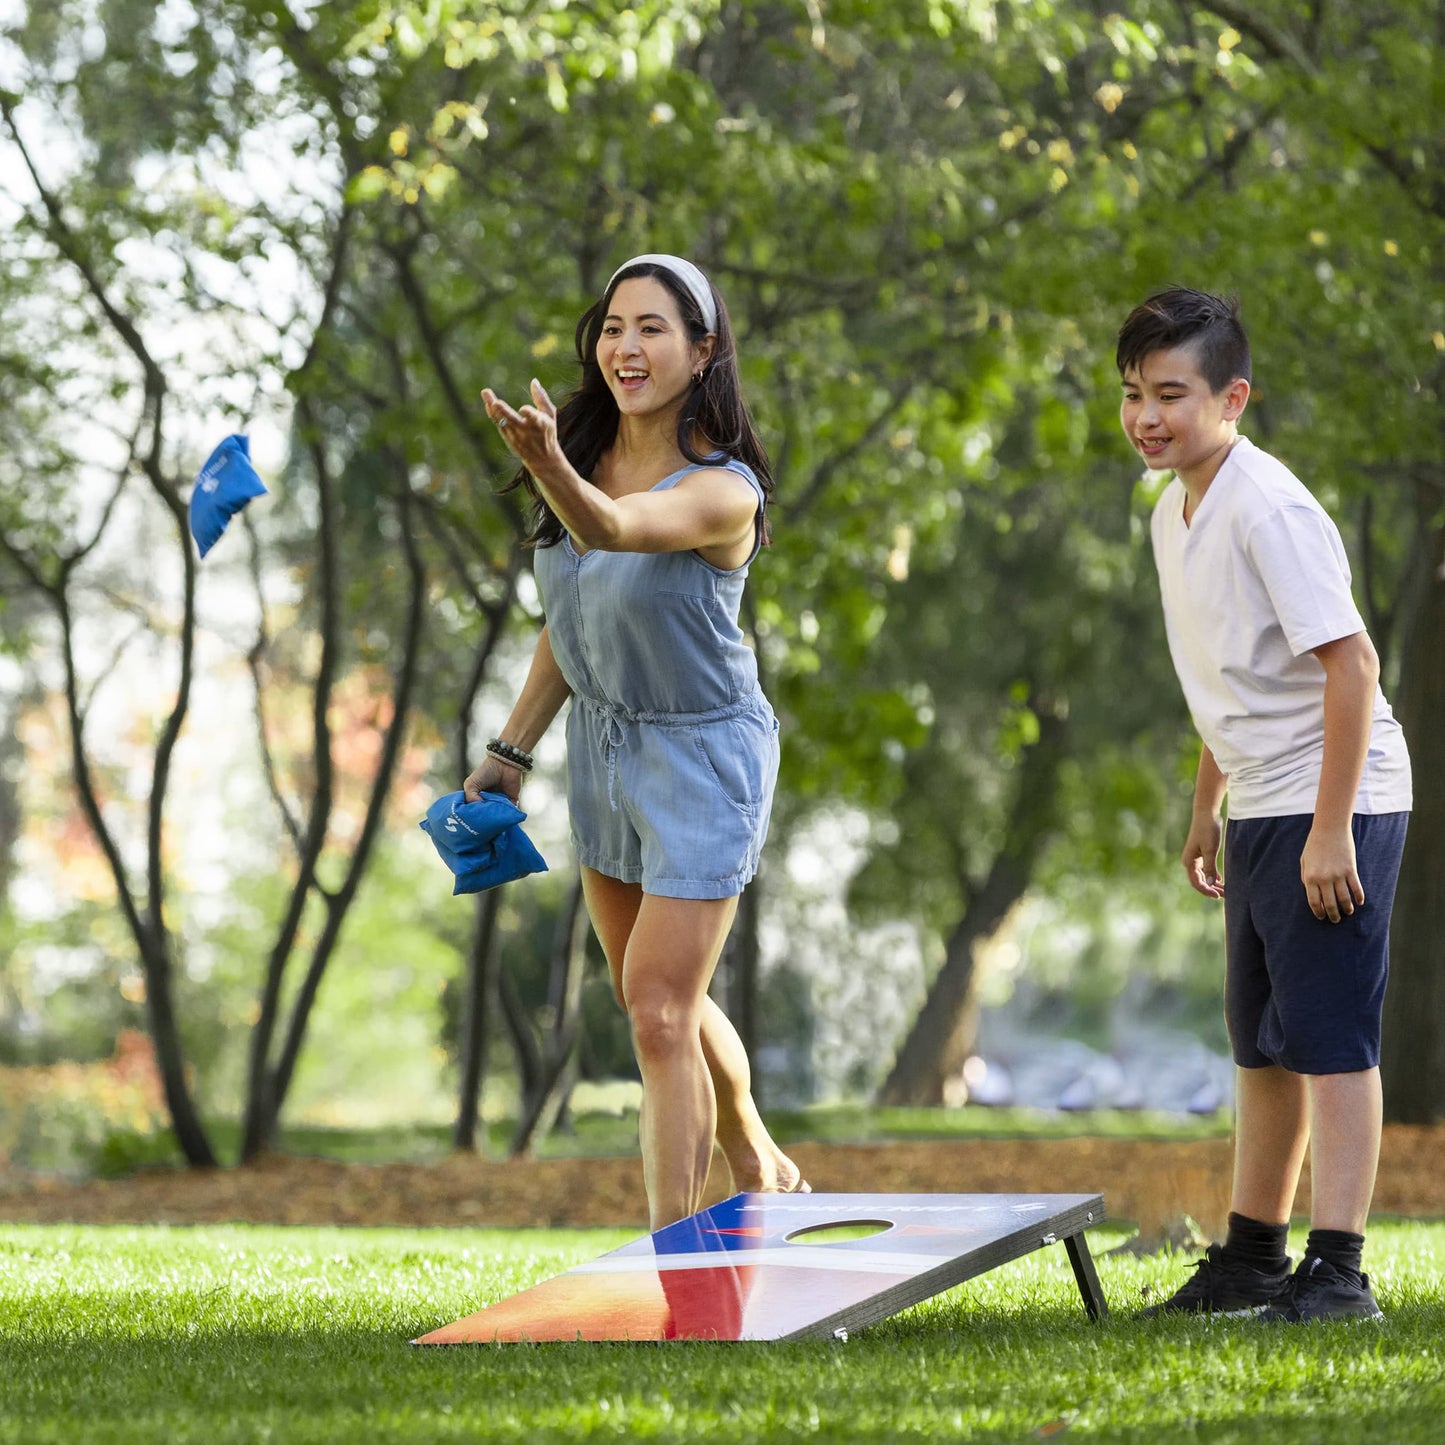 Sportcraft Wooden Corn Hole Bean Bag Toss Lifestyle Image, Woman throwing blue bean bag at target with son watching